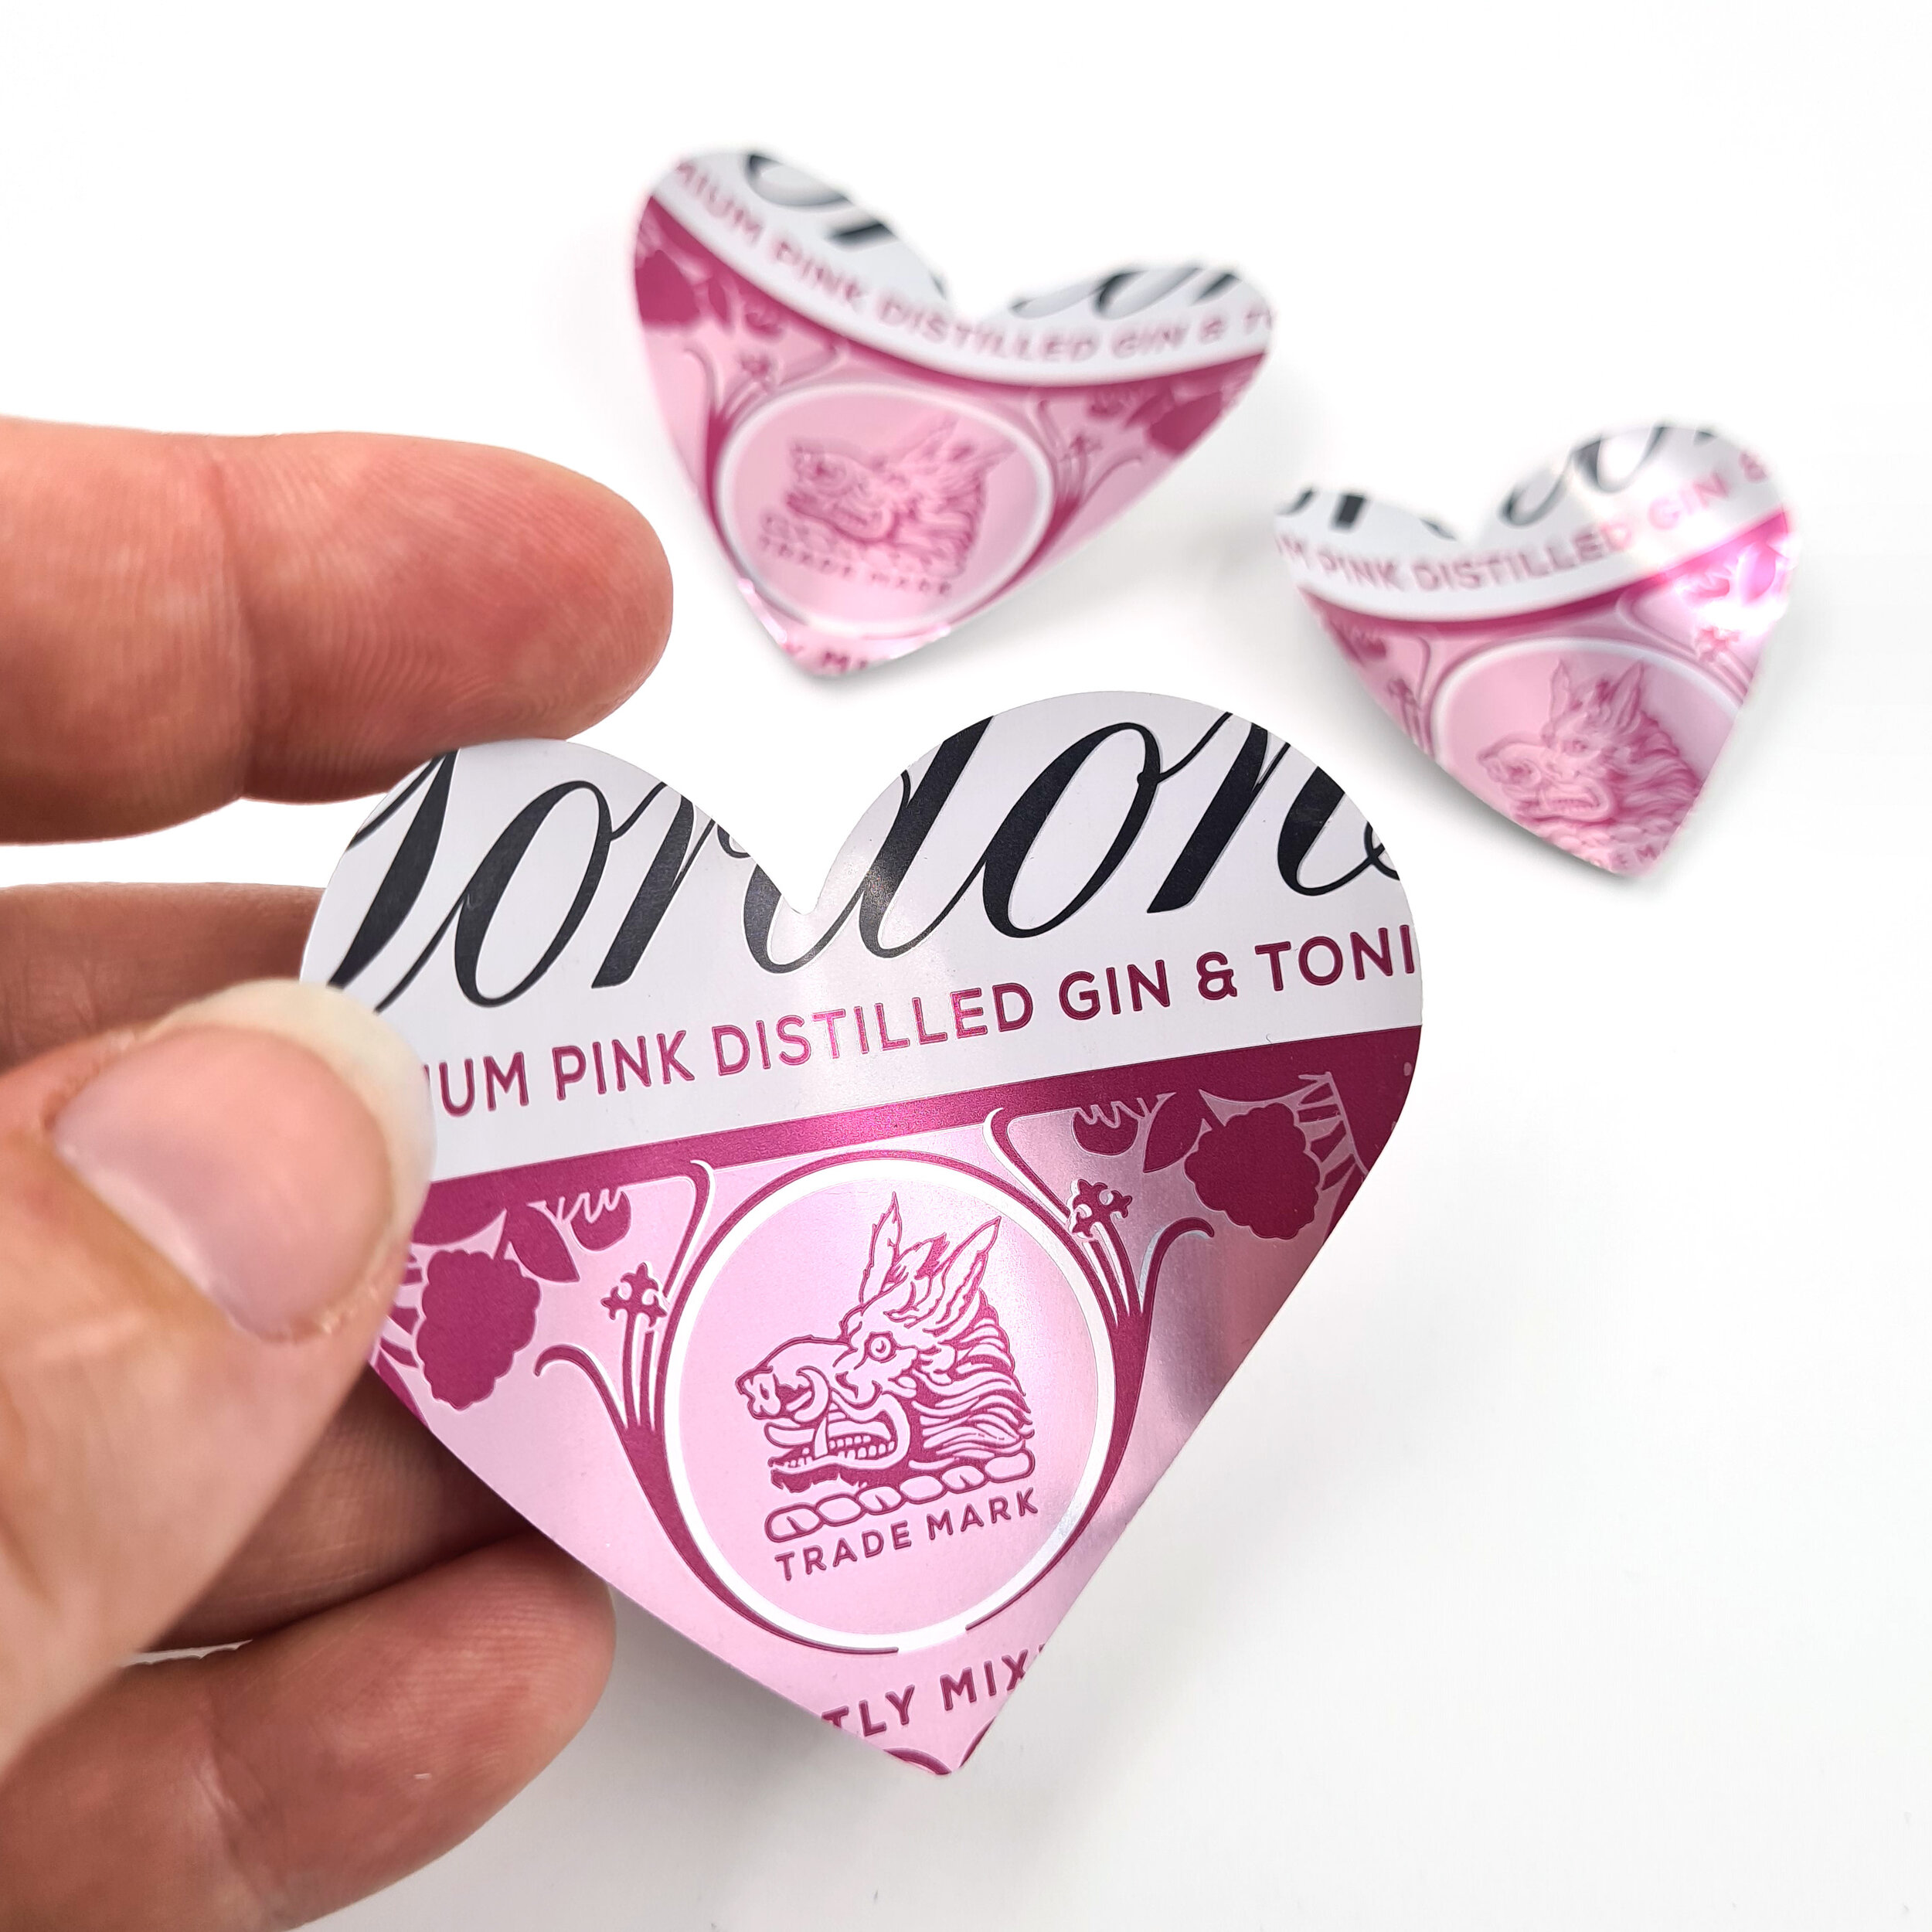 Three Pink and white Gin Heart Can Magnets holding